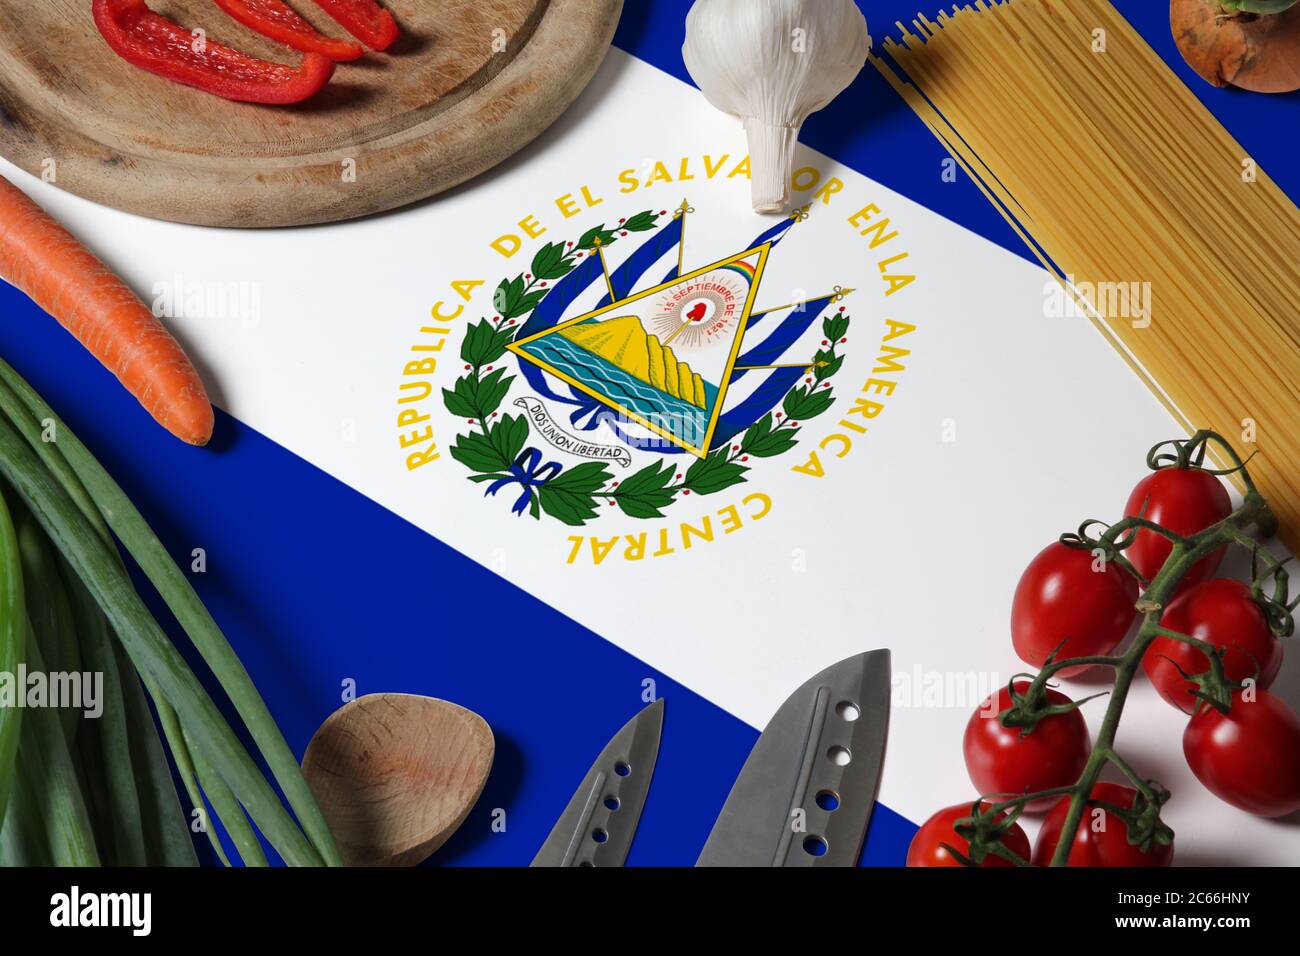 El Salvador flag on fresh vegetables and knife concept wooden table. Cooking concept with preparing background theme. Stock Photo